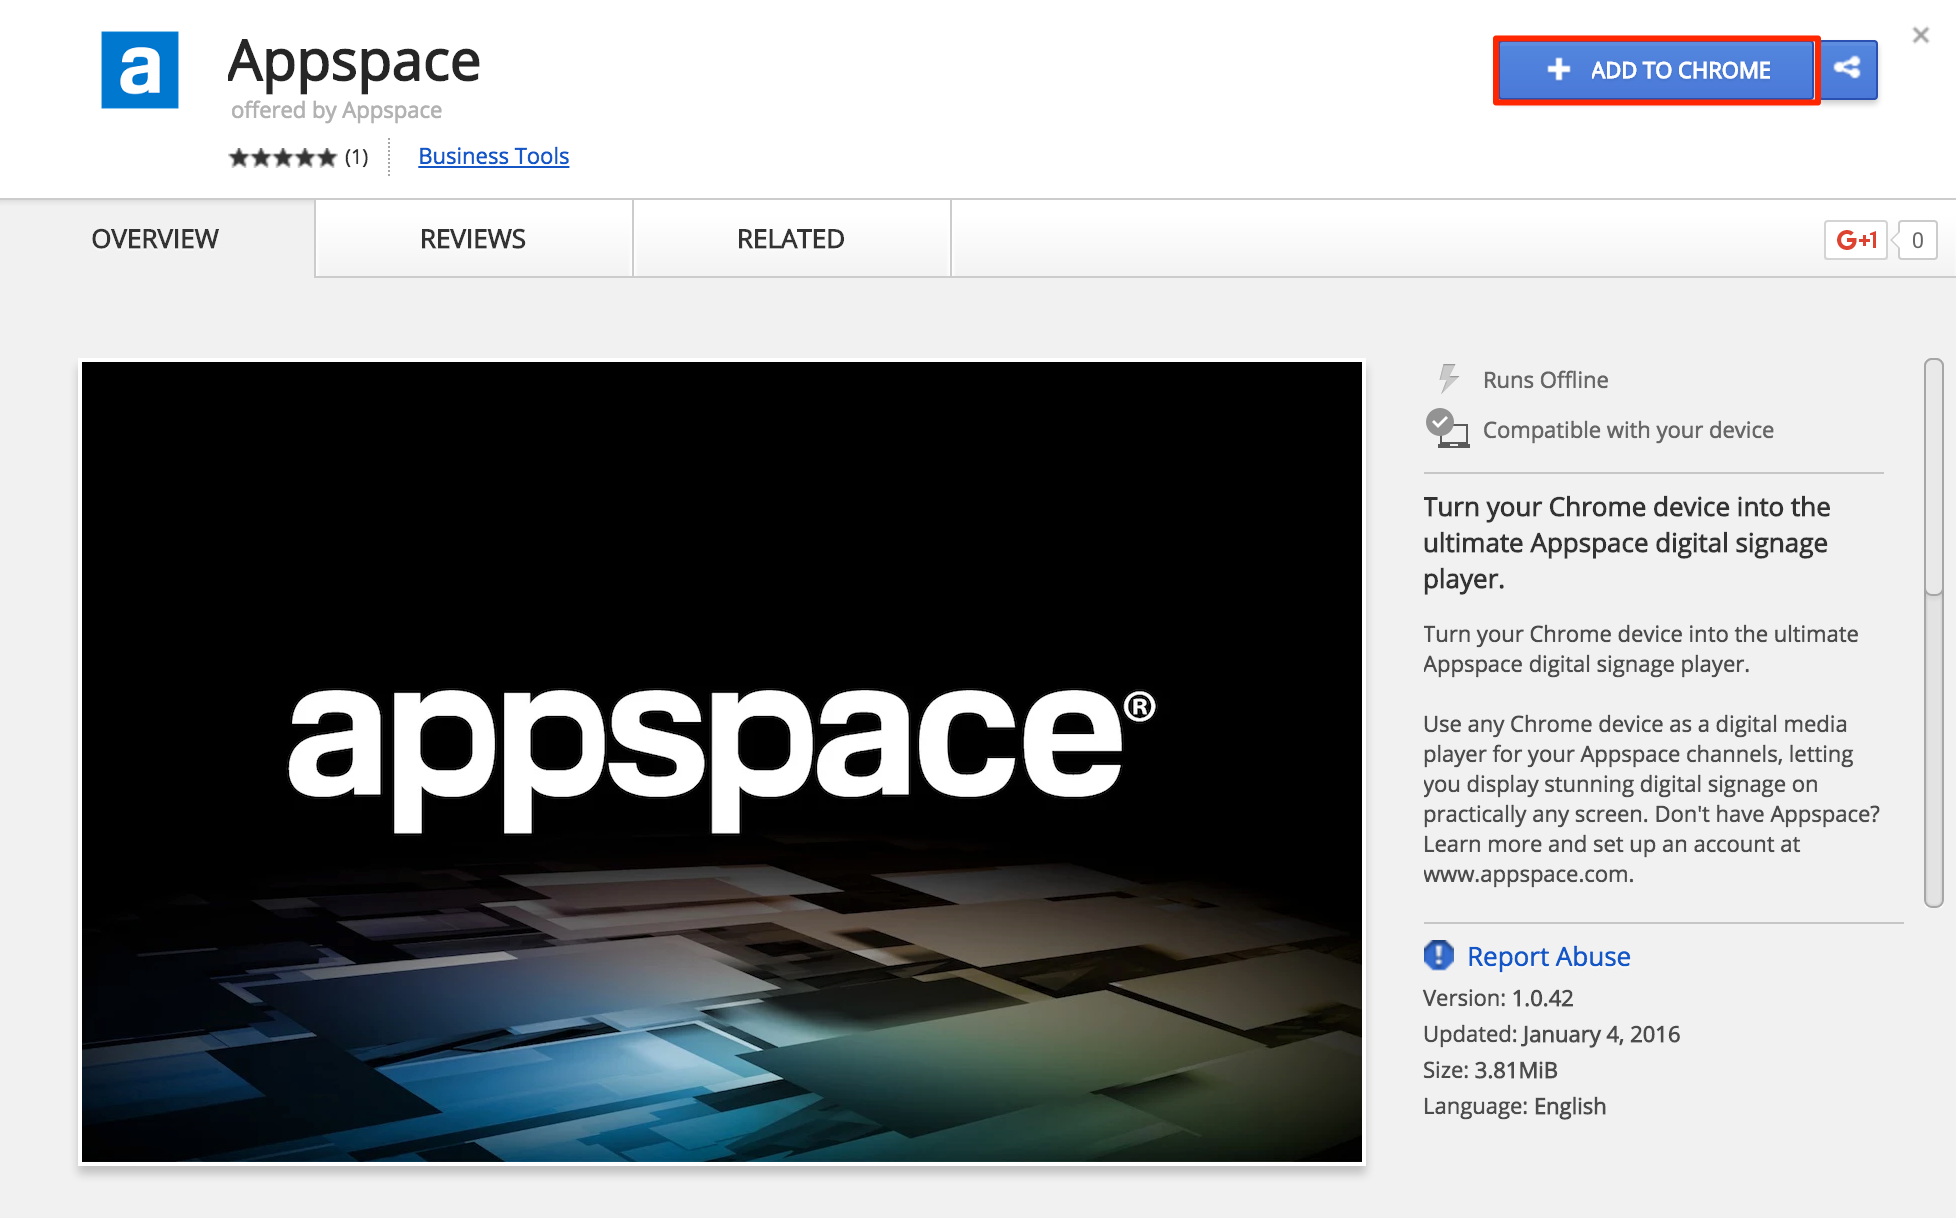 Installing the Appspace App on a Chrome OS device — Appspace v6.1 Documentation